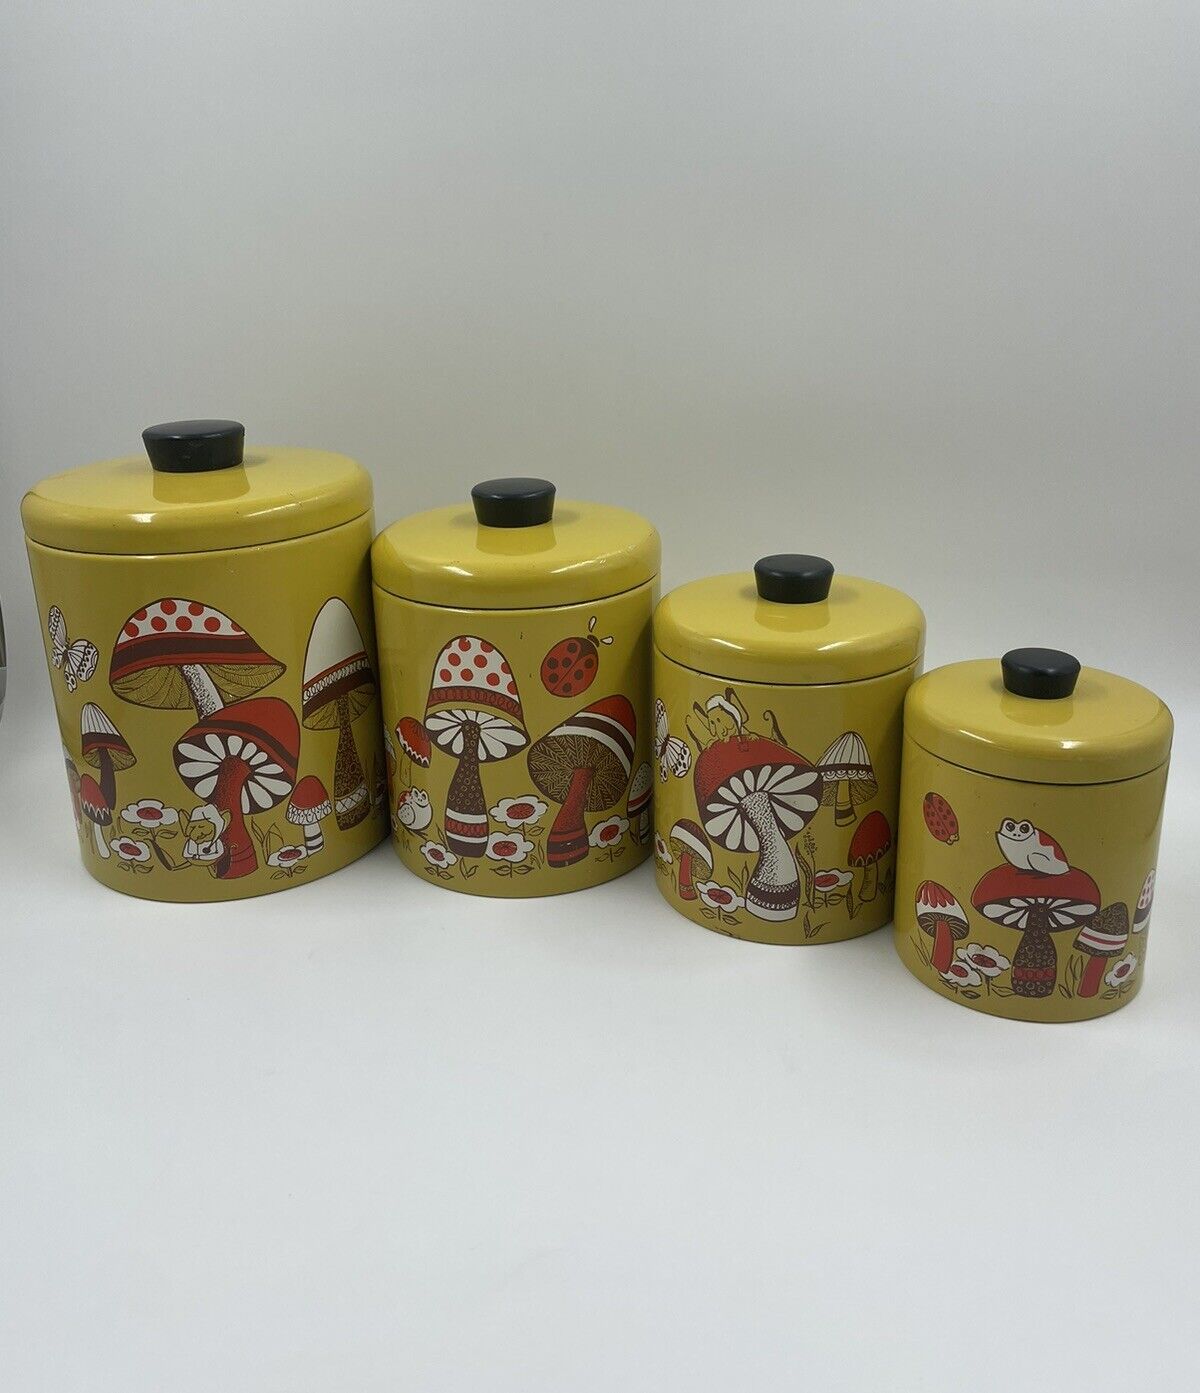 Vintage Mushroom Canisters Ransburg Mustard Yellow & Red w/ Lids Retro 60's USA